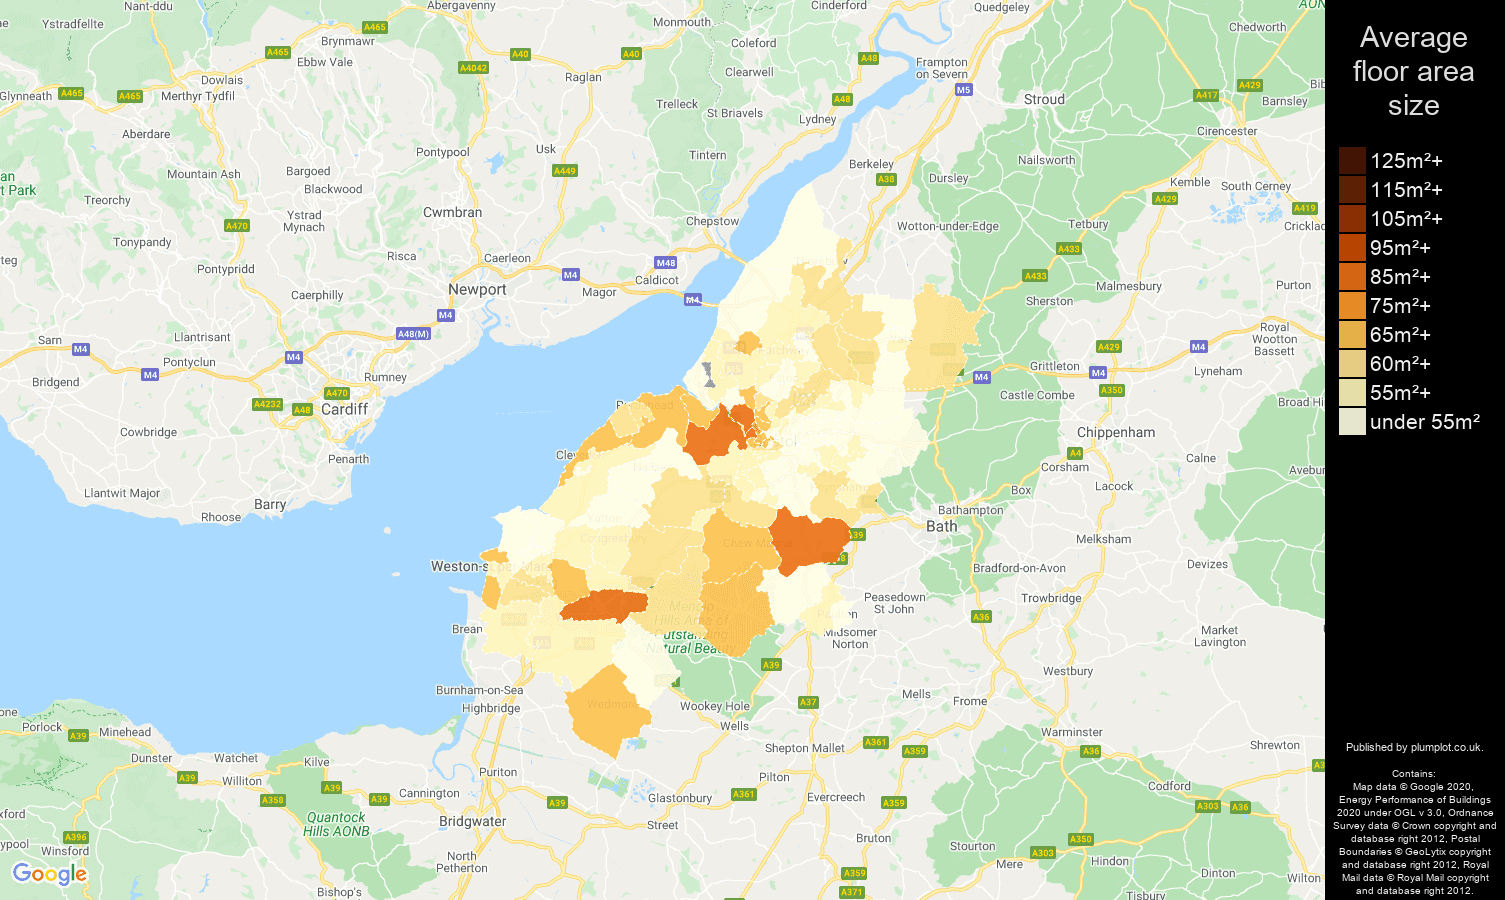 Bristol map of average floor area size of flats